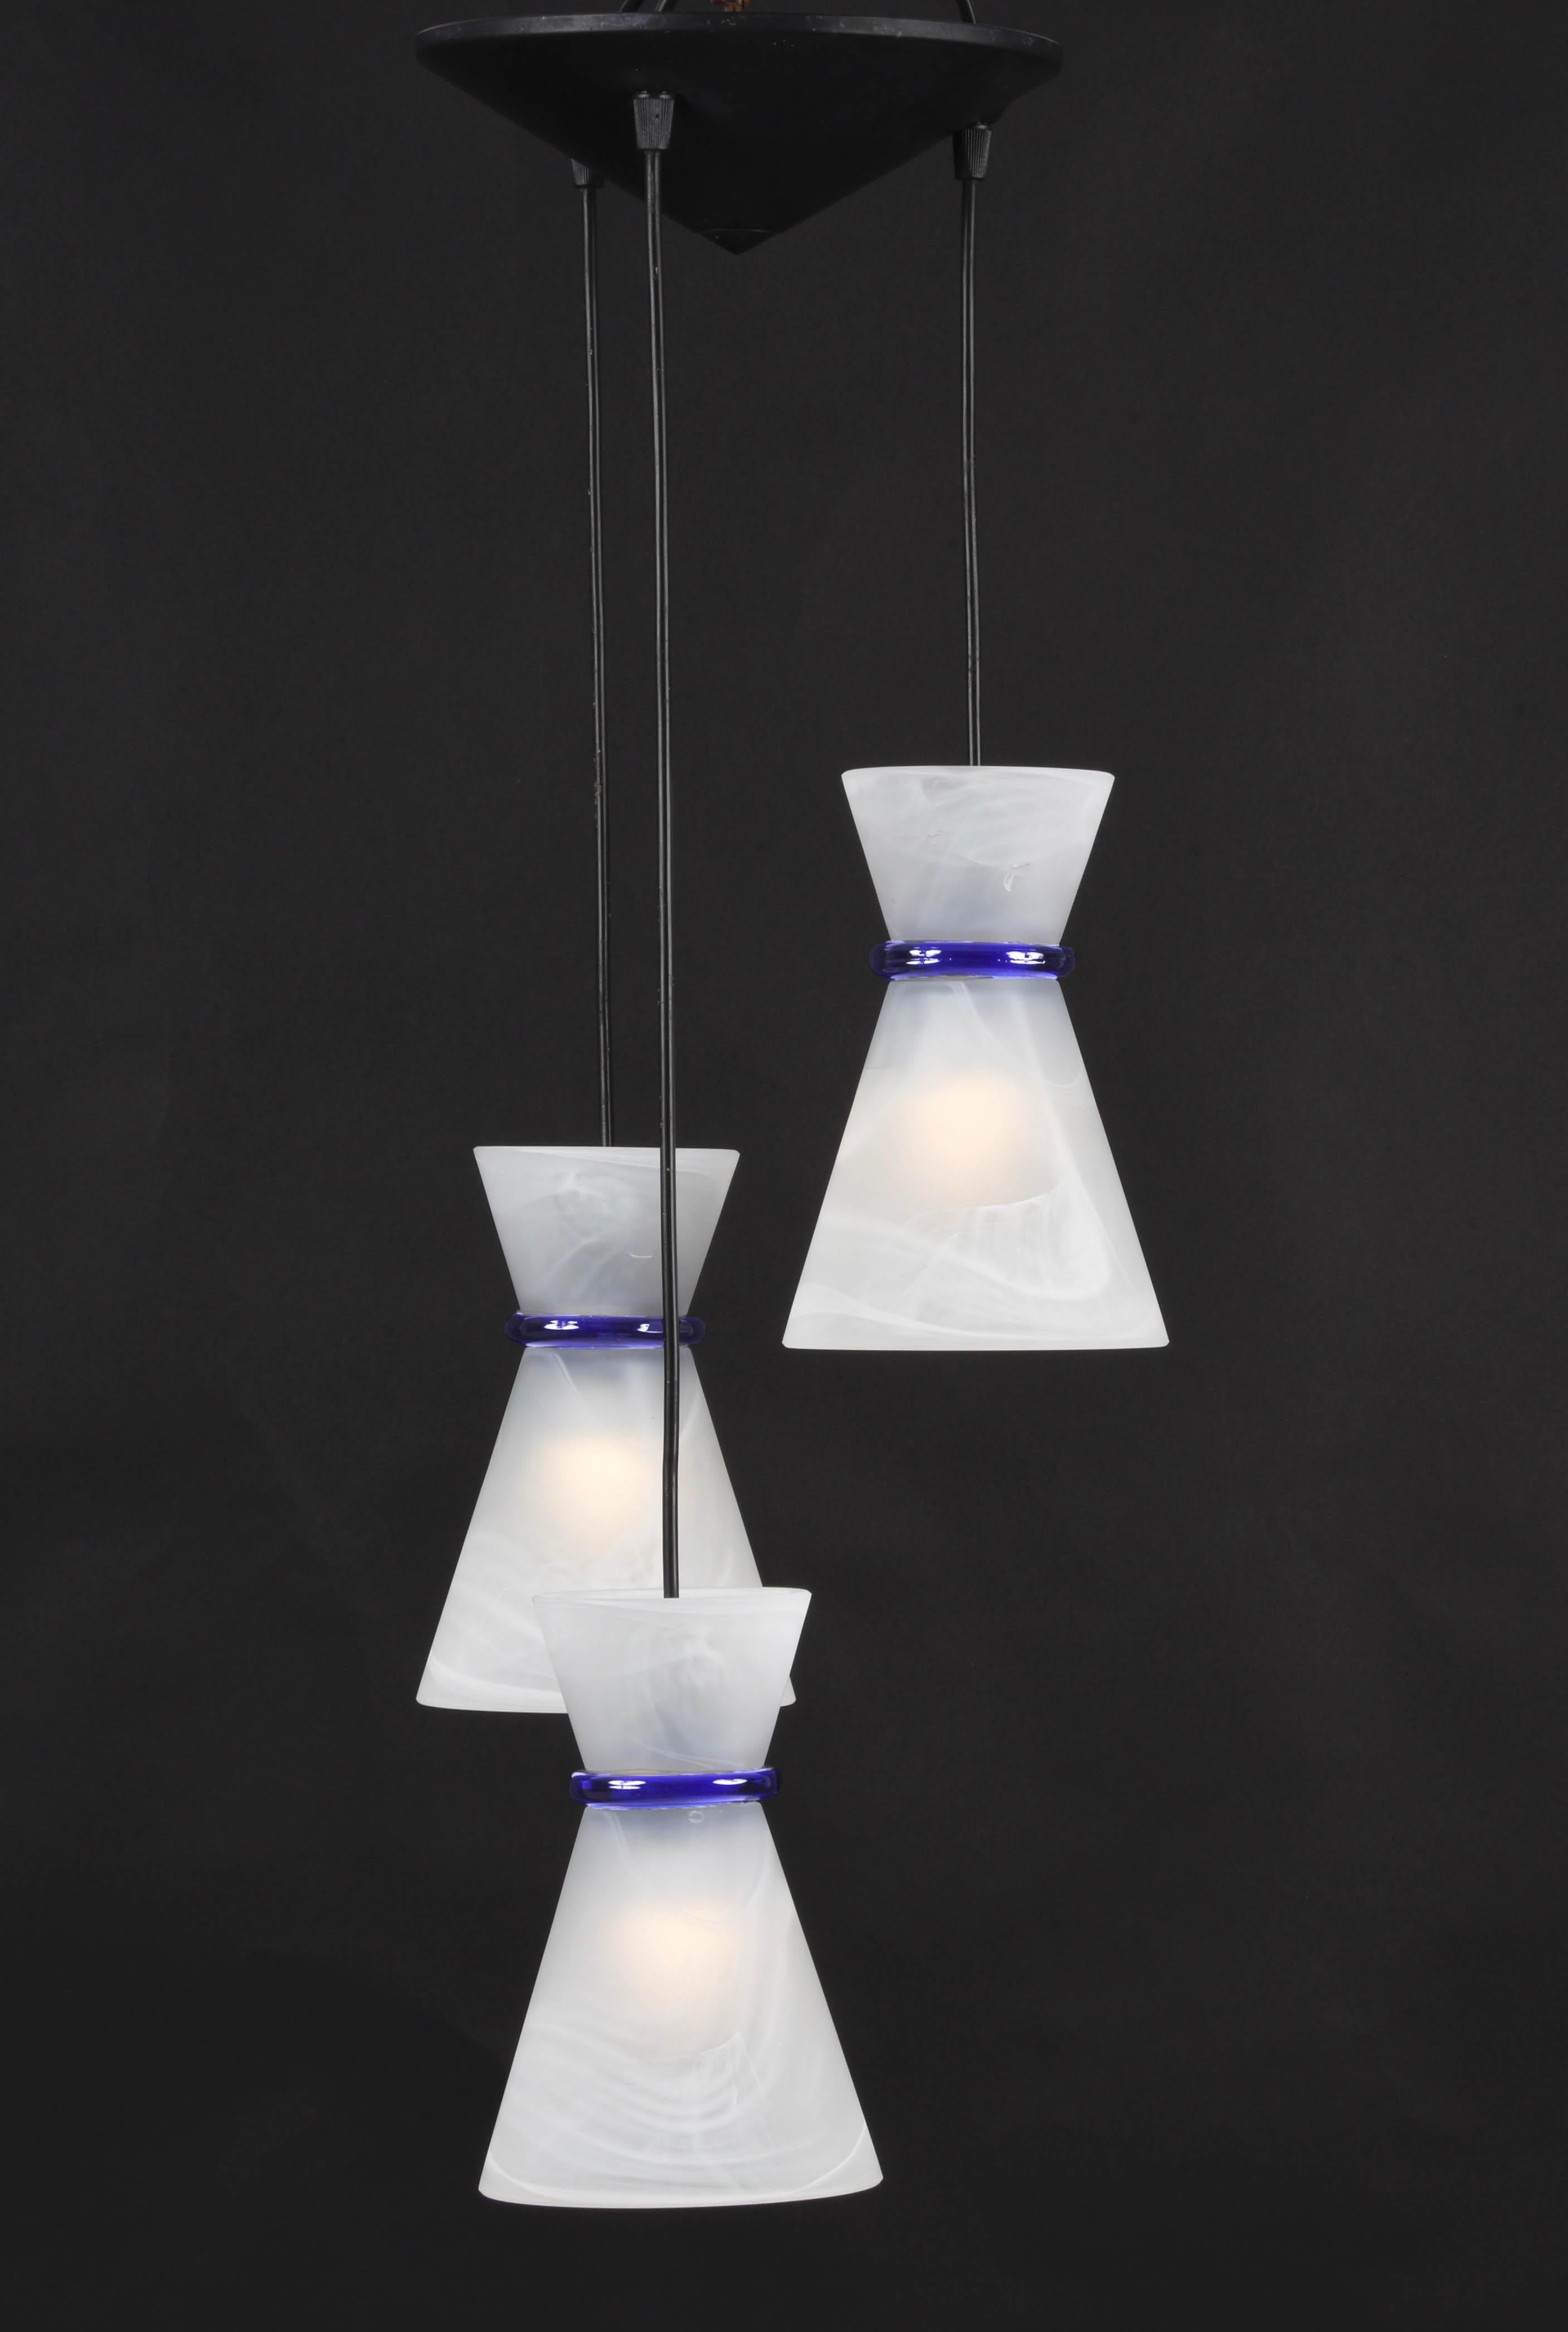 Fantastic white marbled Murano glass Italian chandelier with three pendant lights. This amazing piece was designed in Italy during the 1980s.

These three pendants have marbled white cones and a blue Murano glass ring. Every single pendant has a